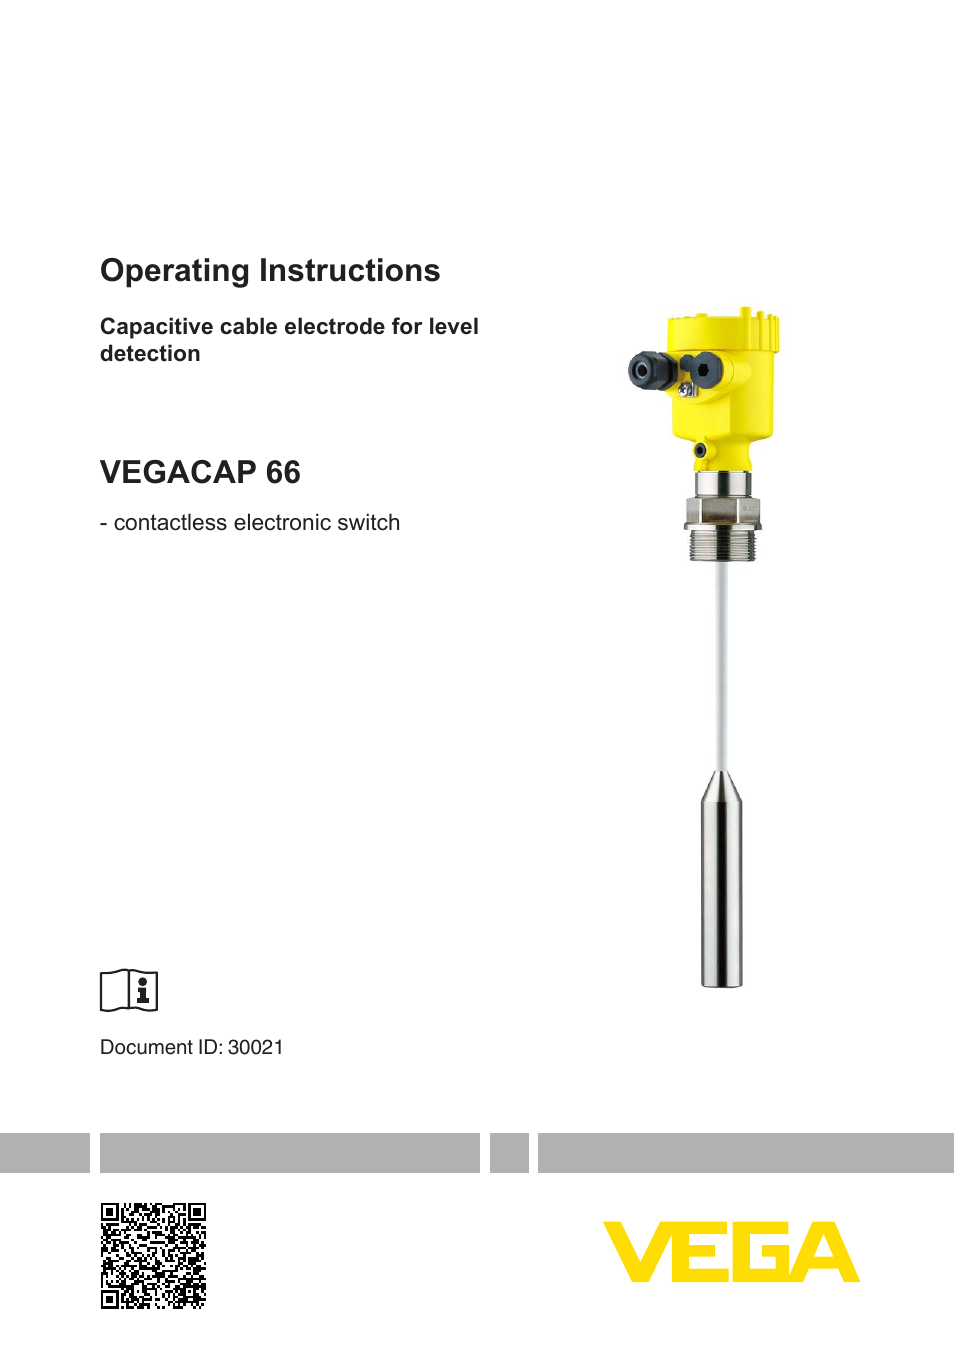 VEGACAP 66 - contactless electronic switch